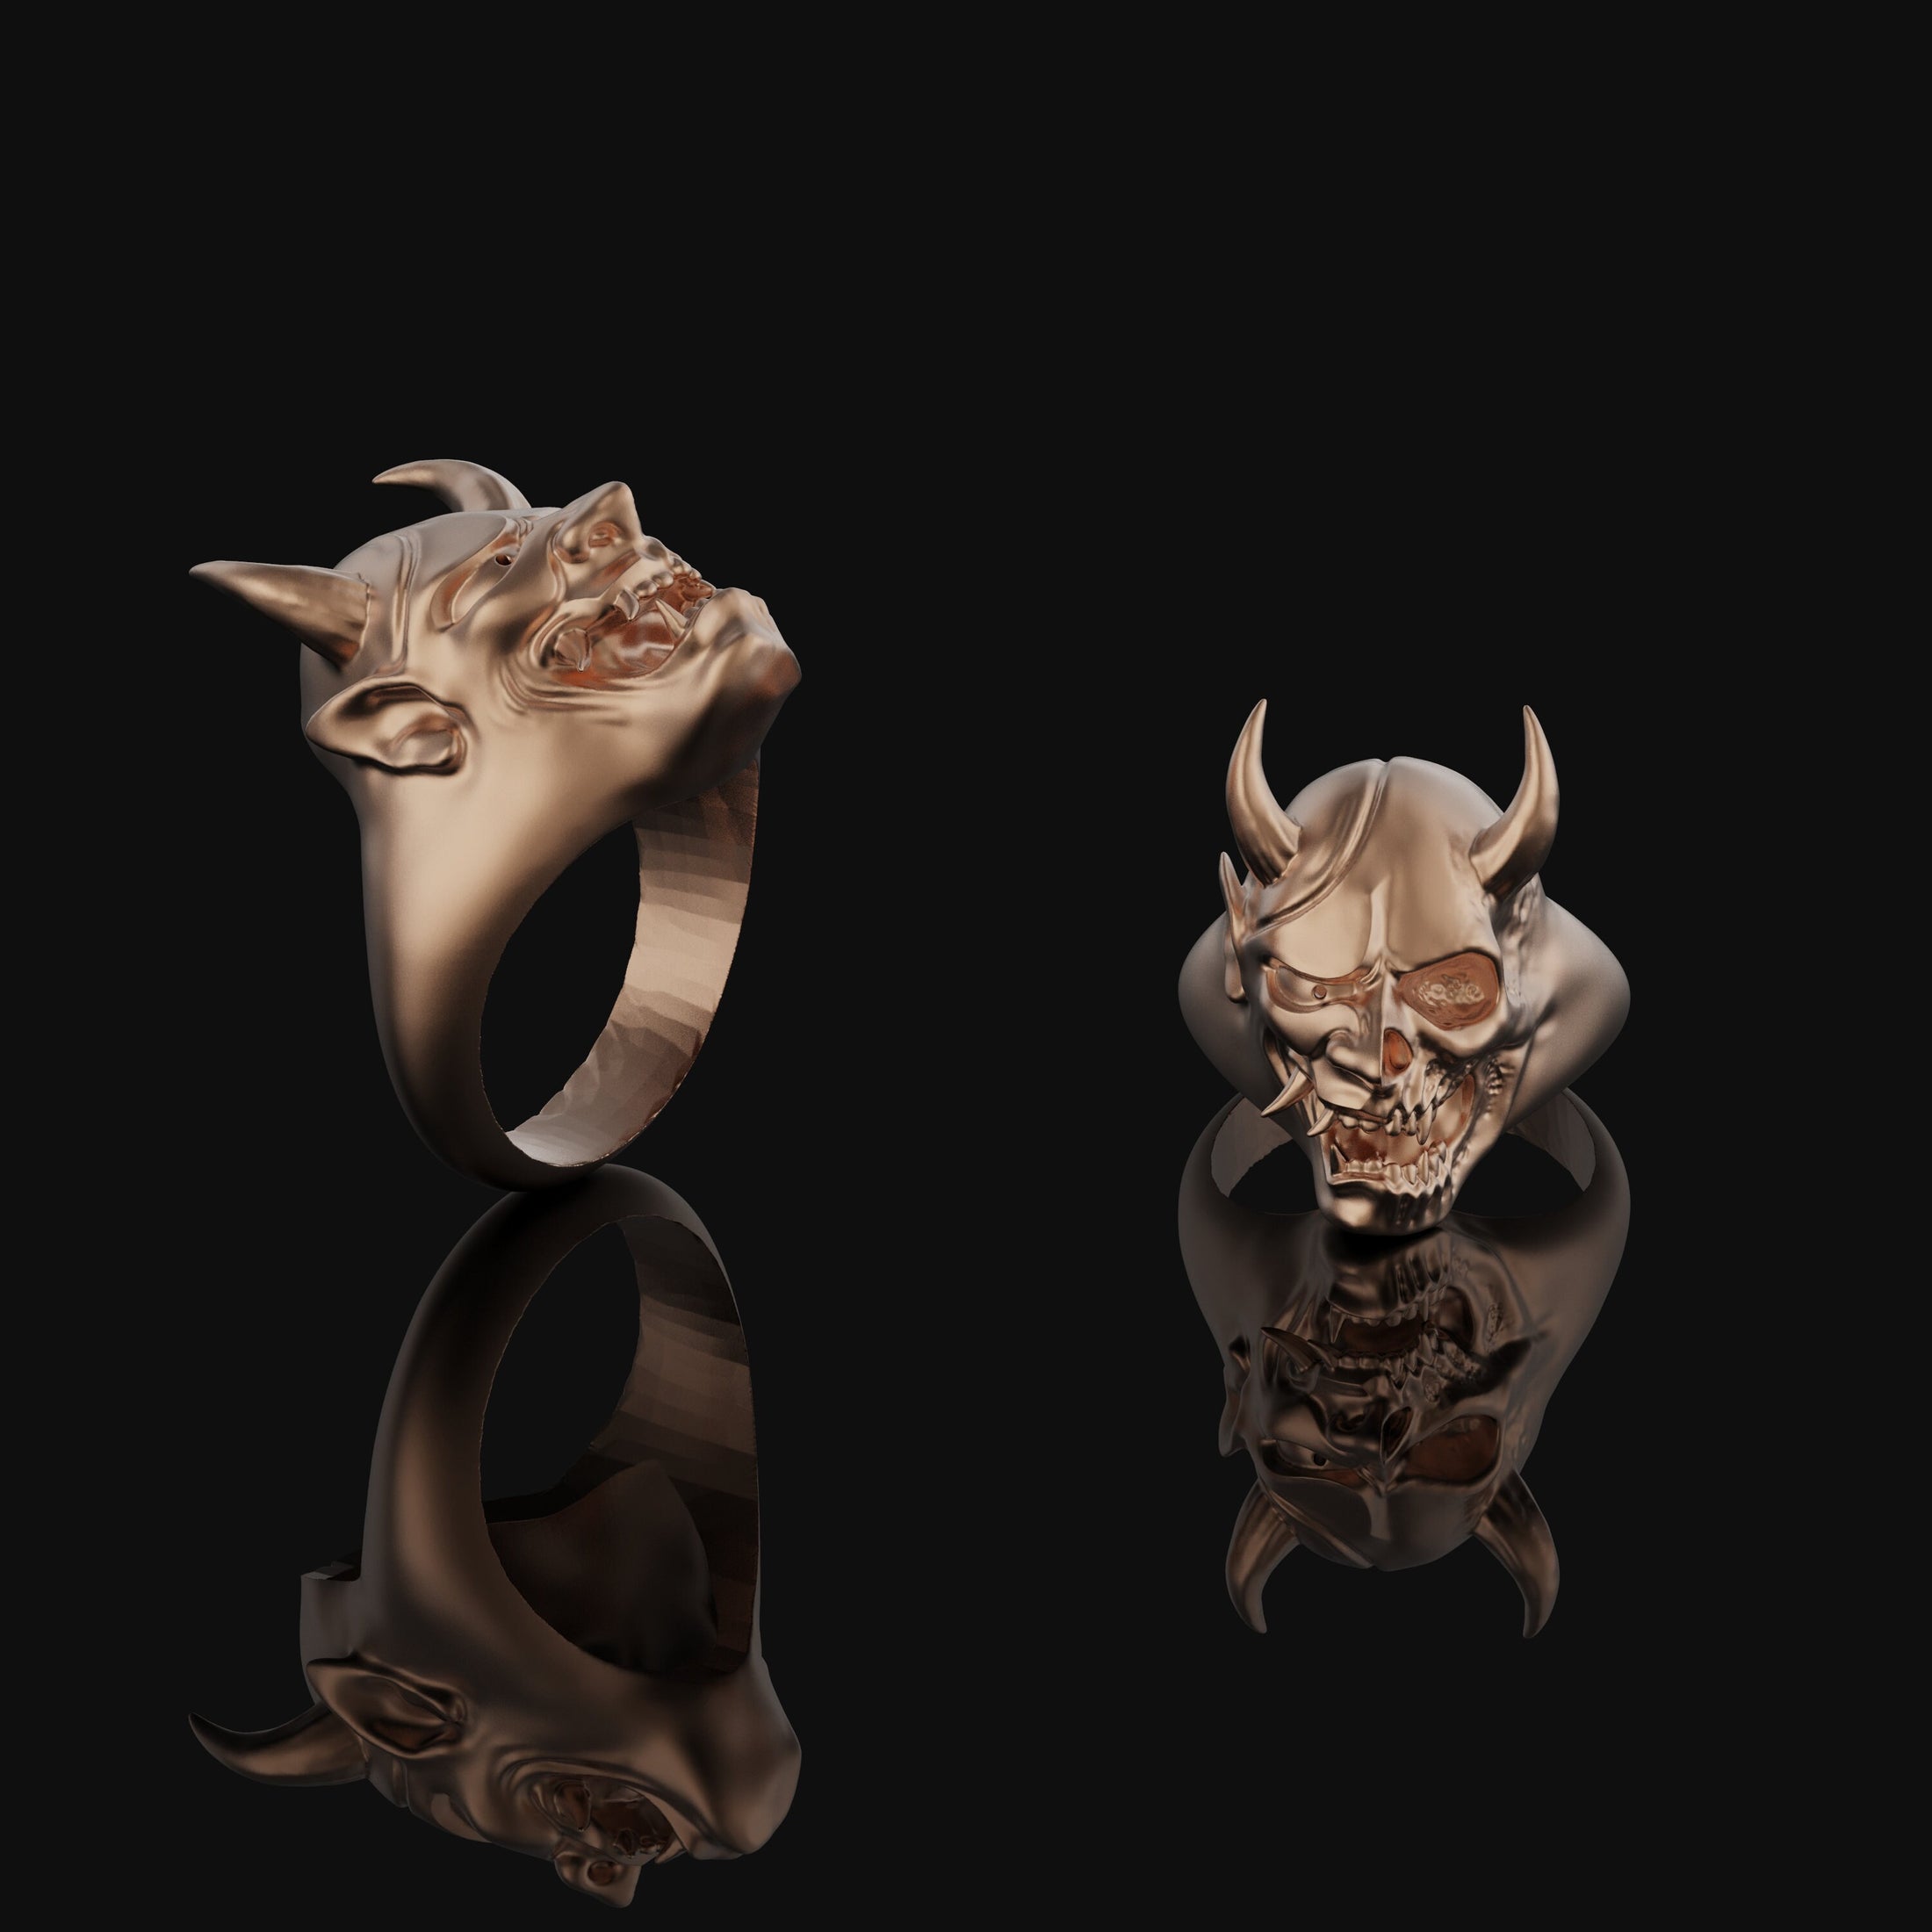 Silver Dead Oni Ring, Half-Breed Oni-Hannya Design, Japanese Skull Ring, Unique Yokai Inspired Jewelry, Cultural Mythology Piece